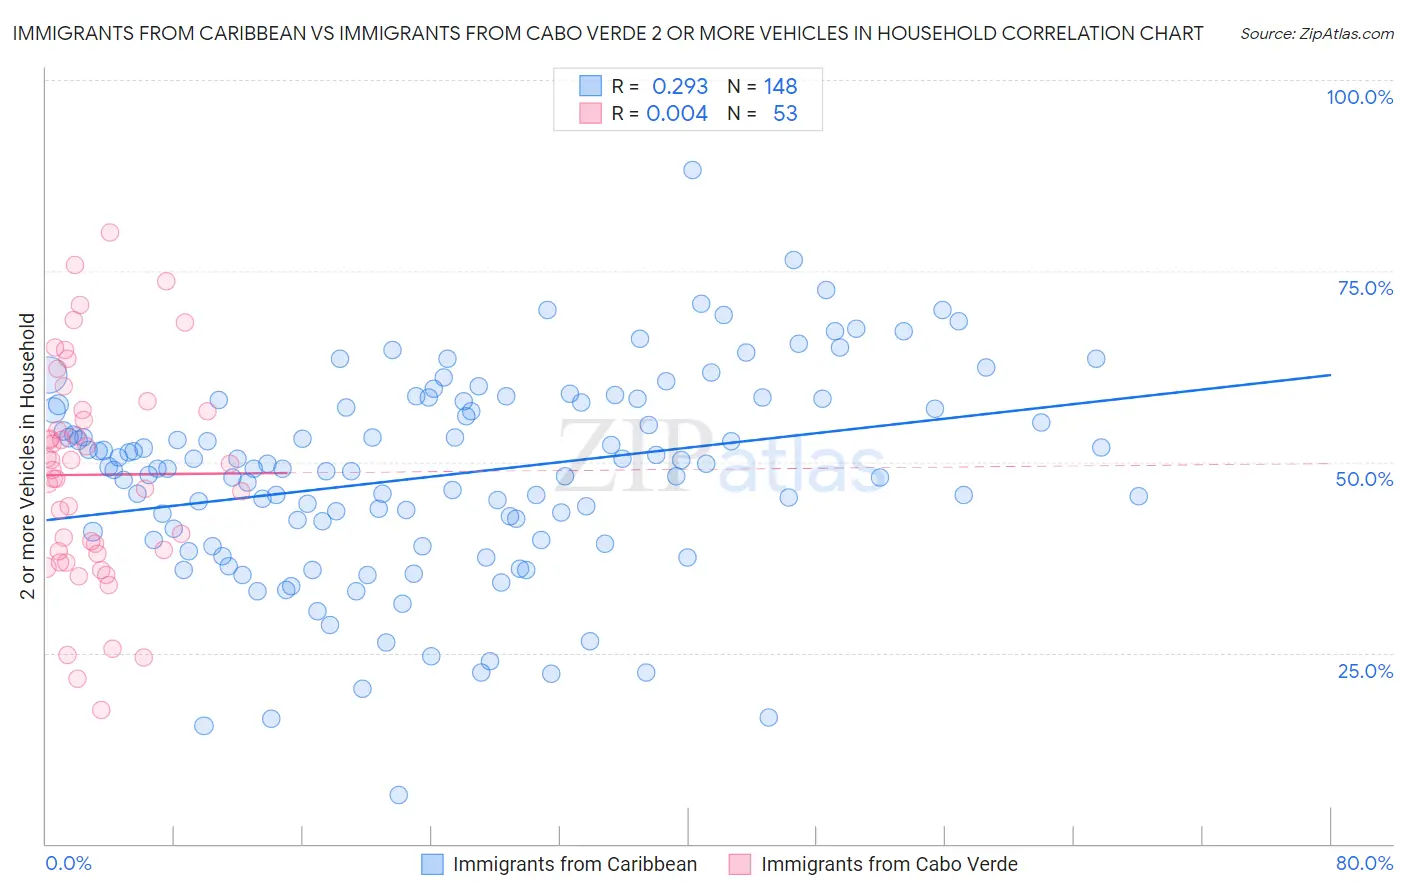 Immigrants from Caribbean vs Immigrants from Cabo Verde 2 or more Vehicles in Household